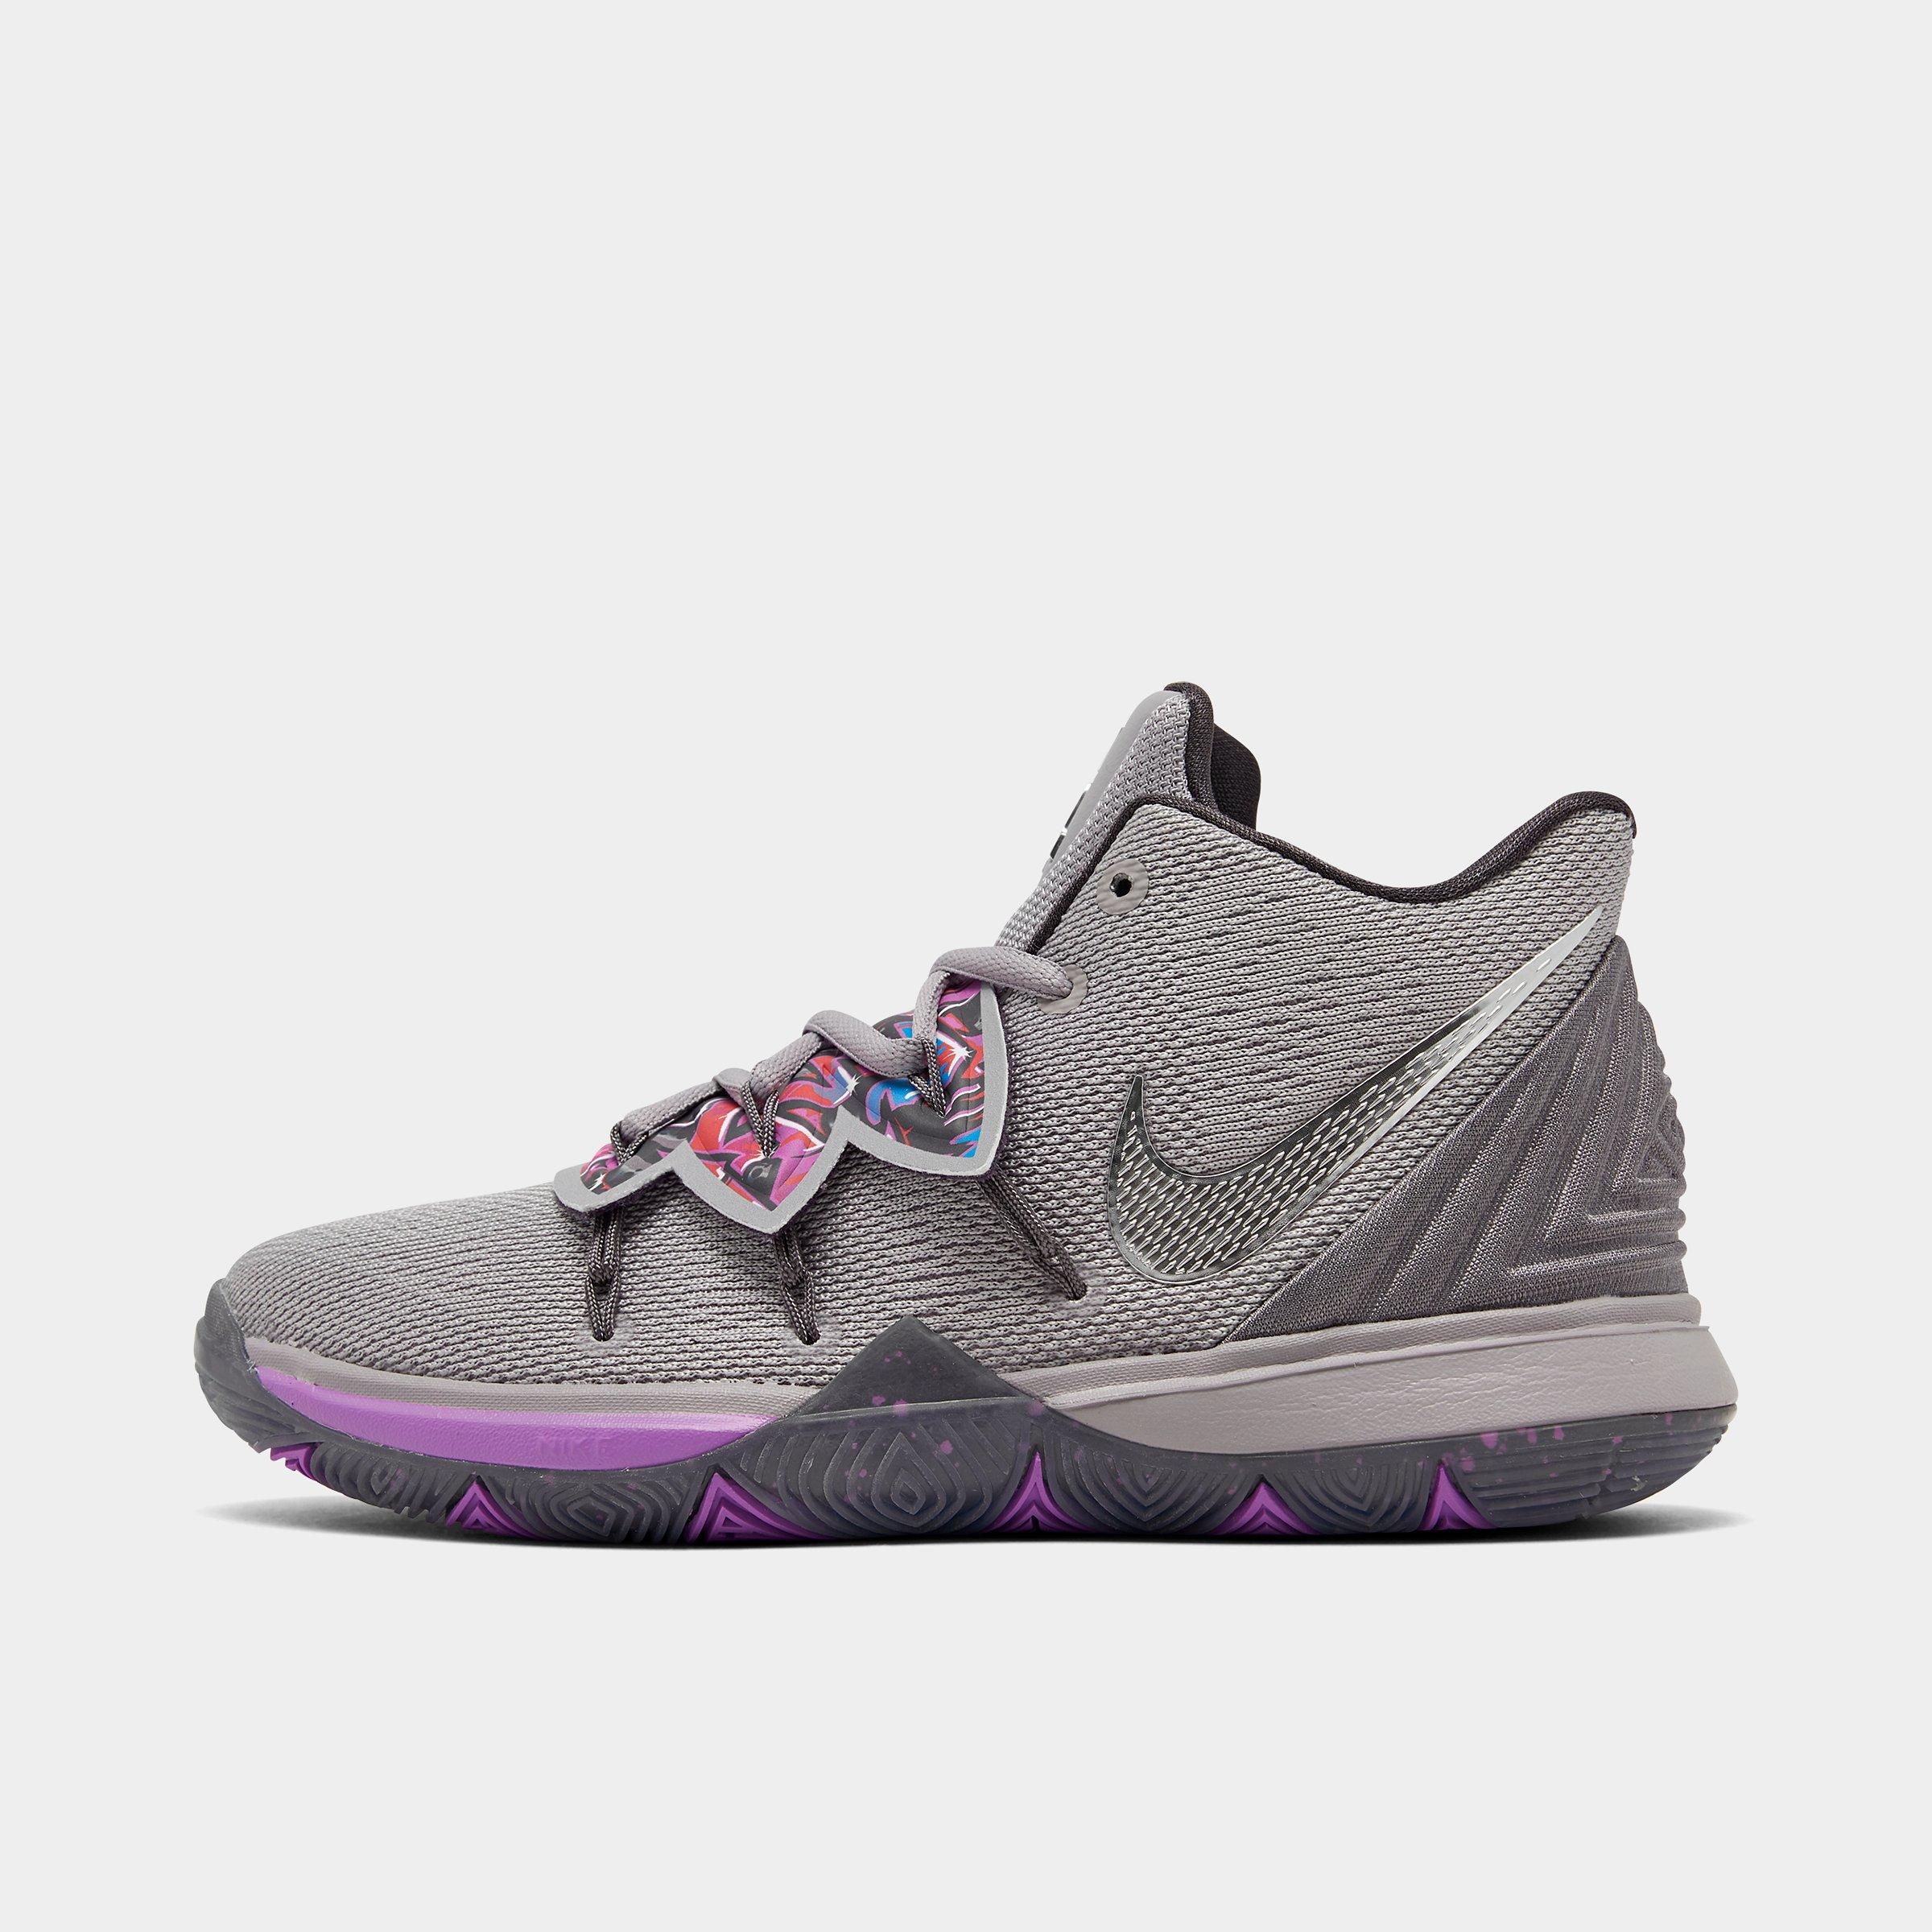 Nike Kyrie 5 Just Do It? Shopee philippines